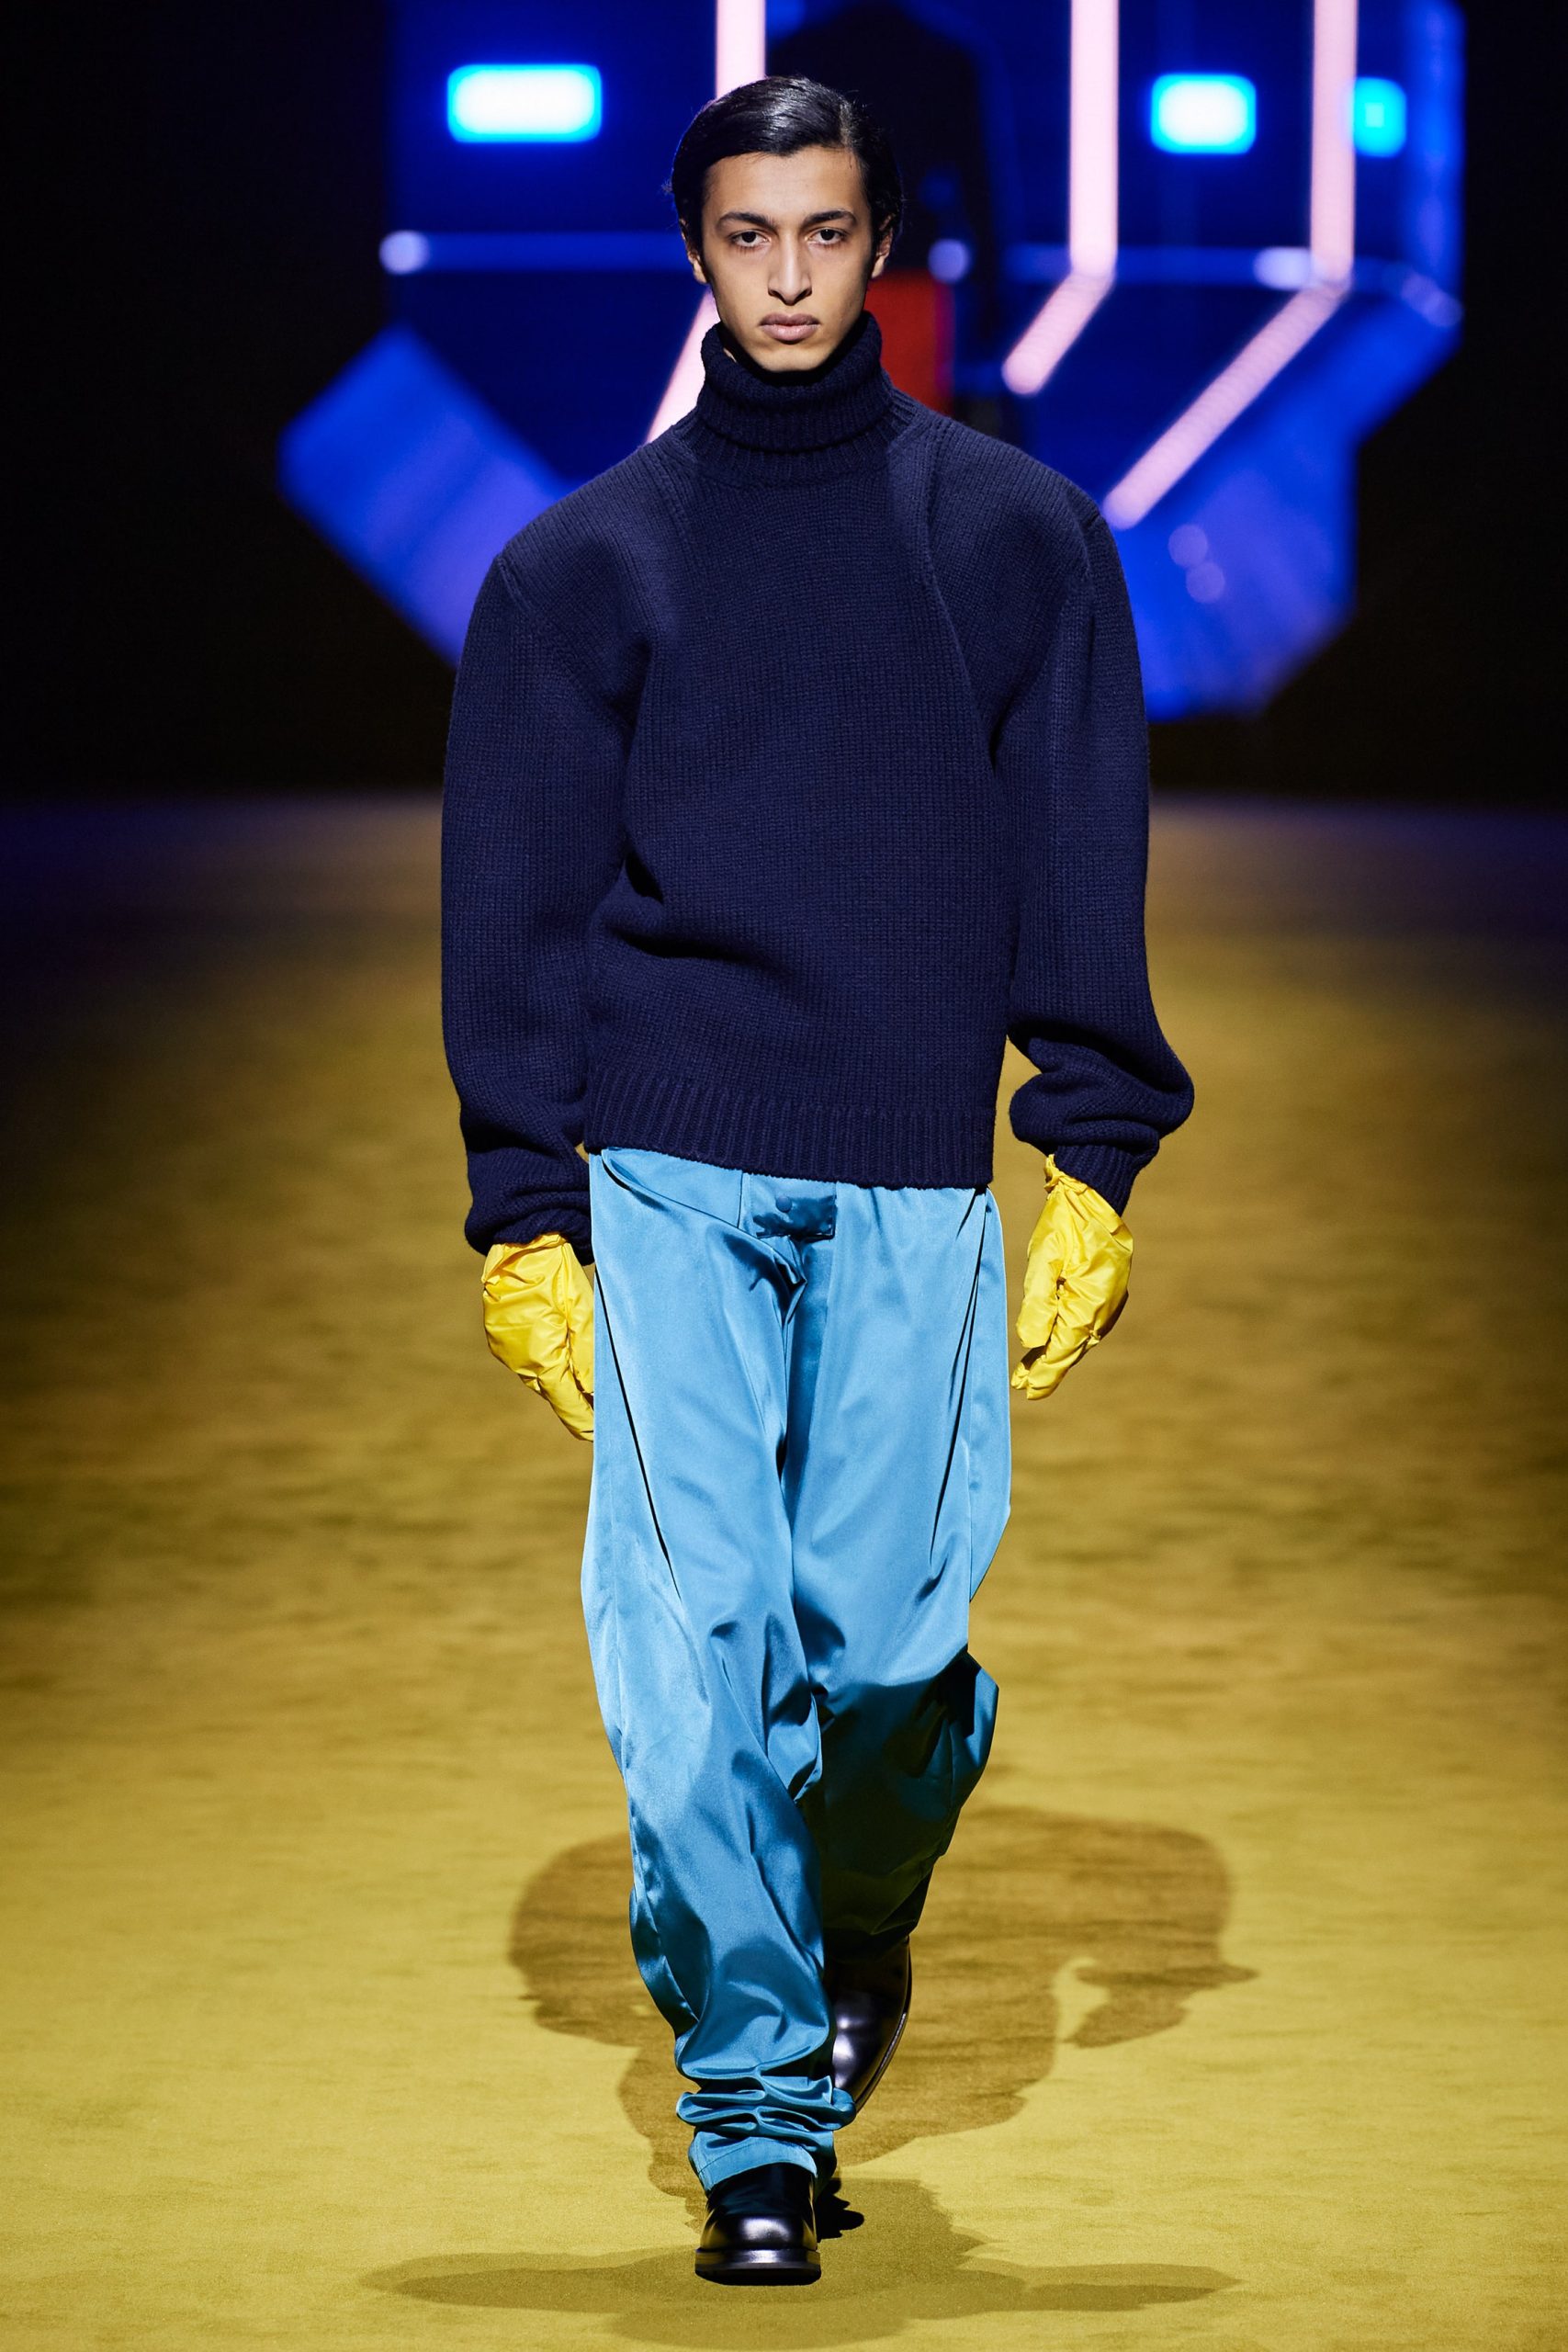 The Trends Elle Spotted At The Men's Fashion Week 2022